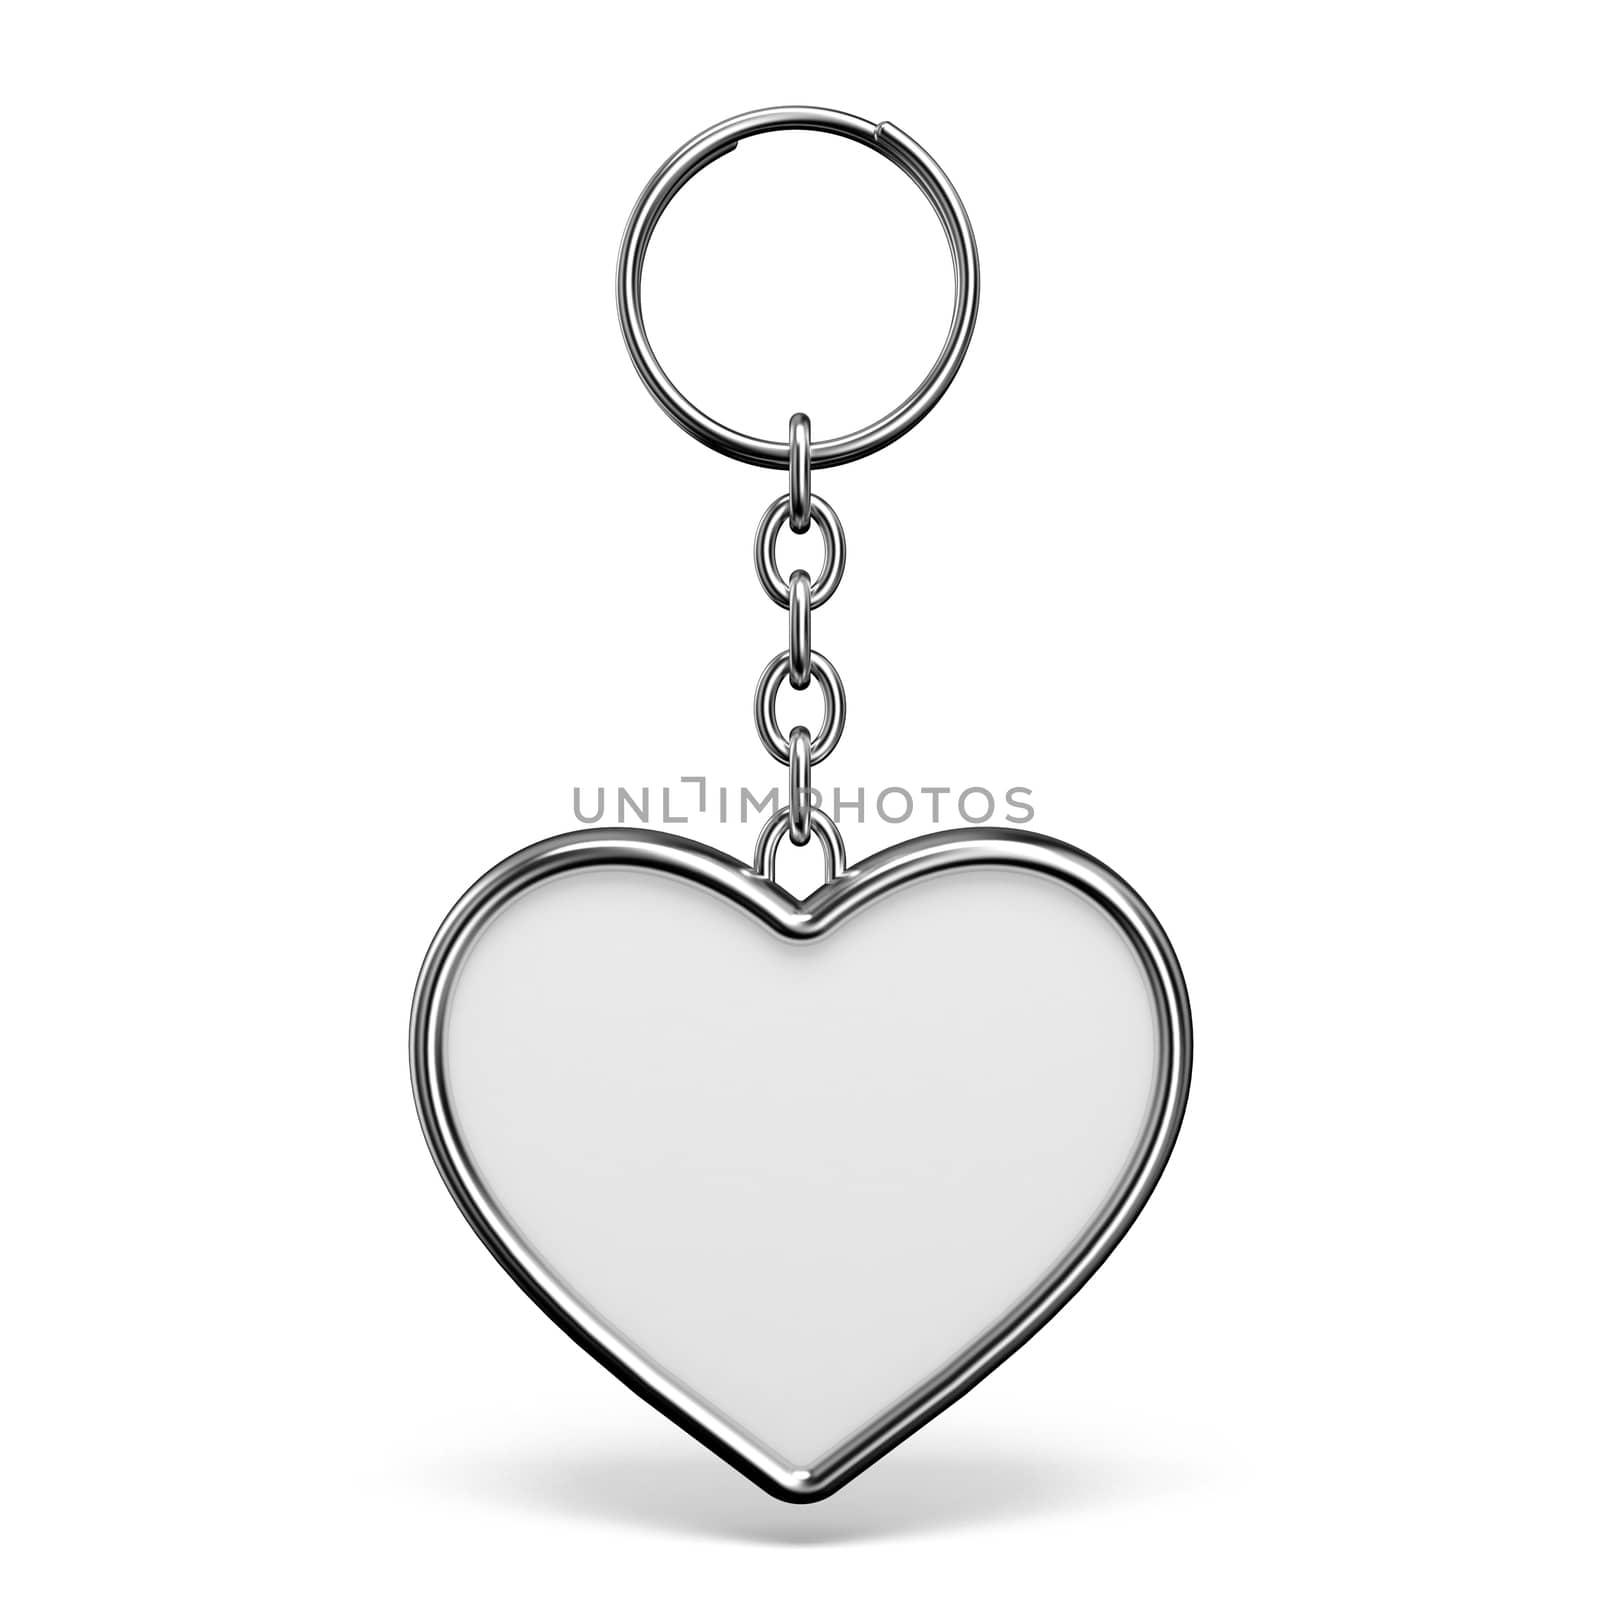 Blank metal trinket with a ring for a key heart shape 3D by djmilic